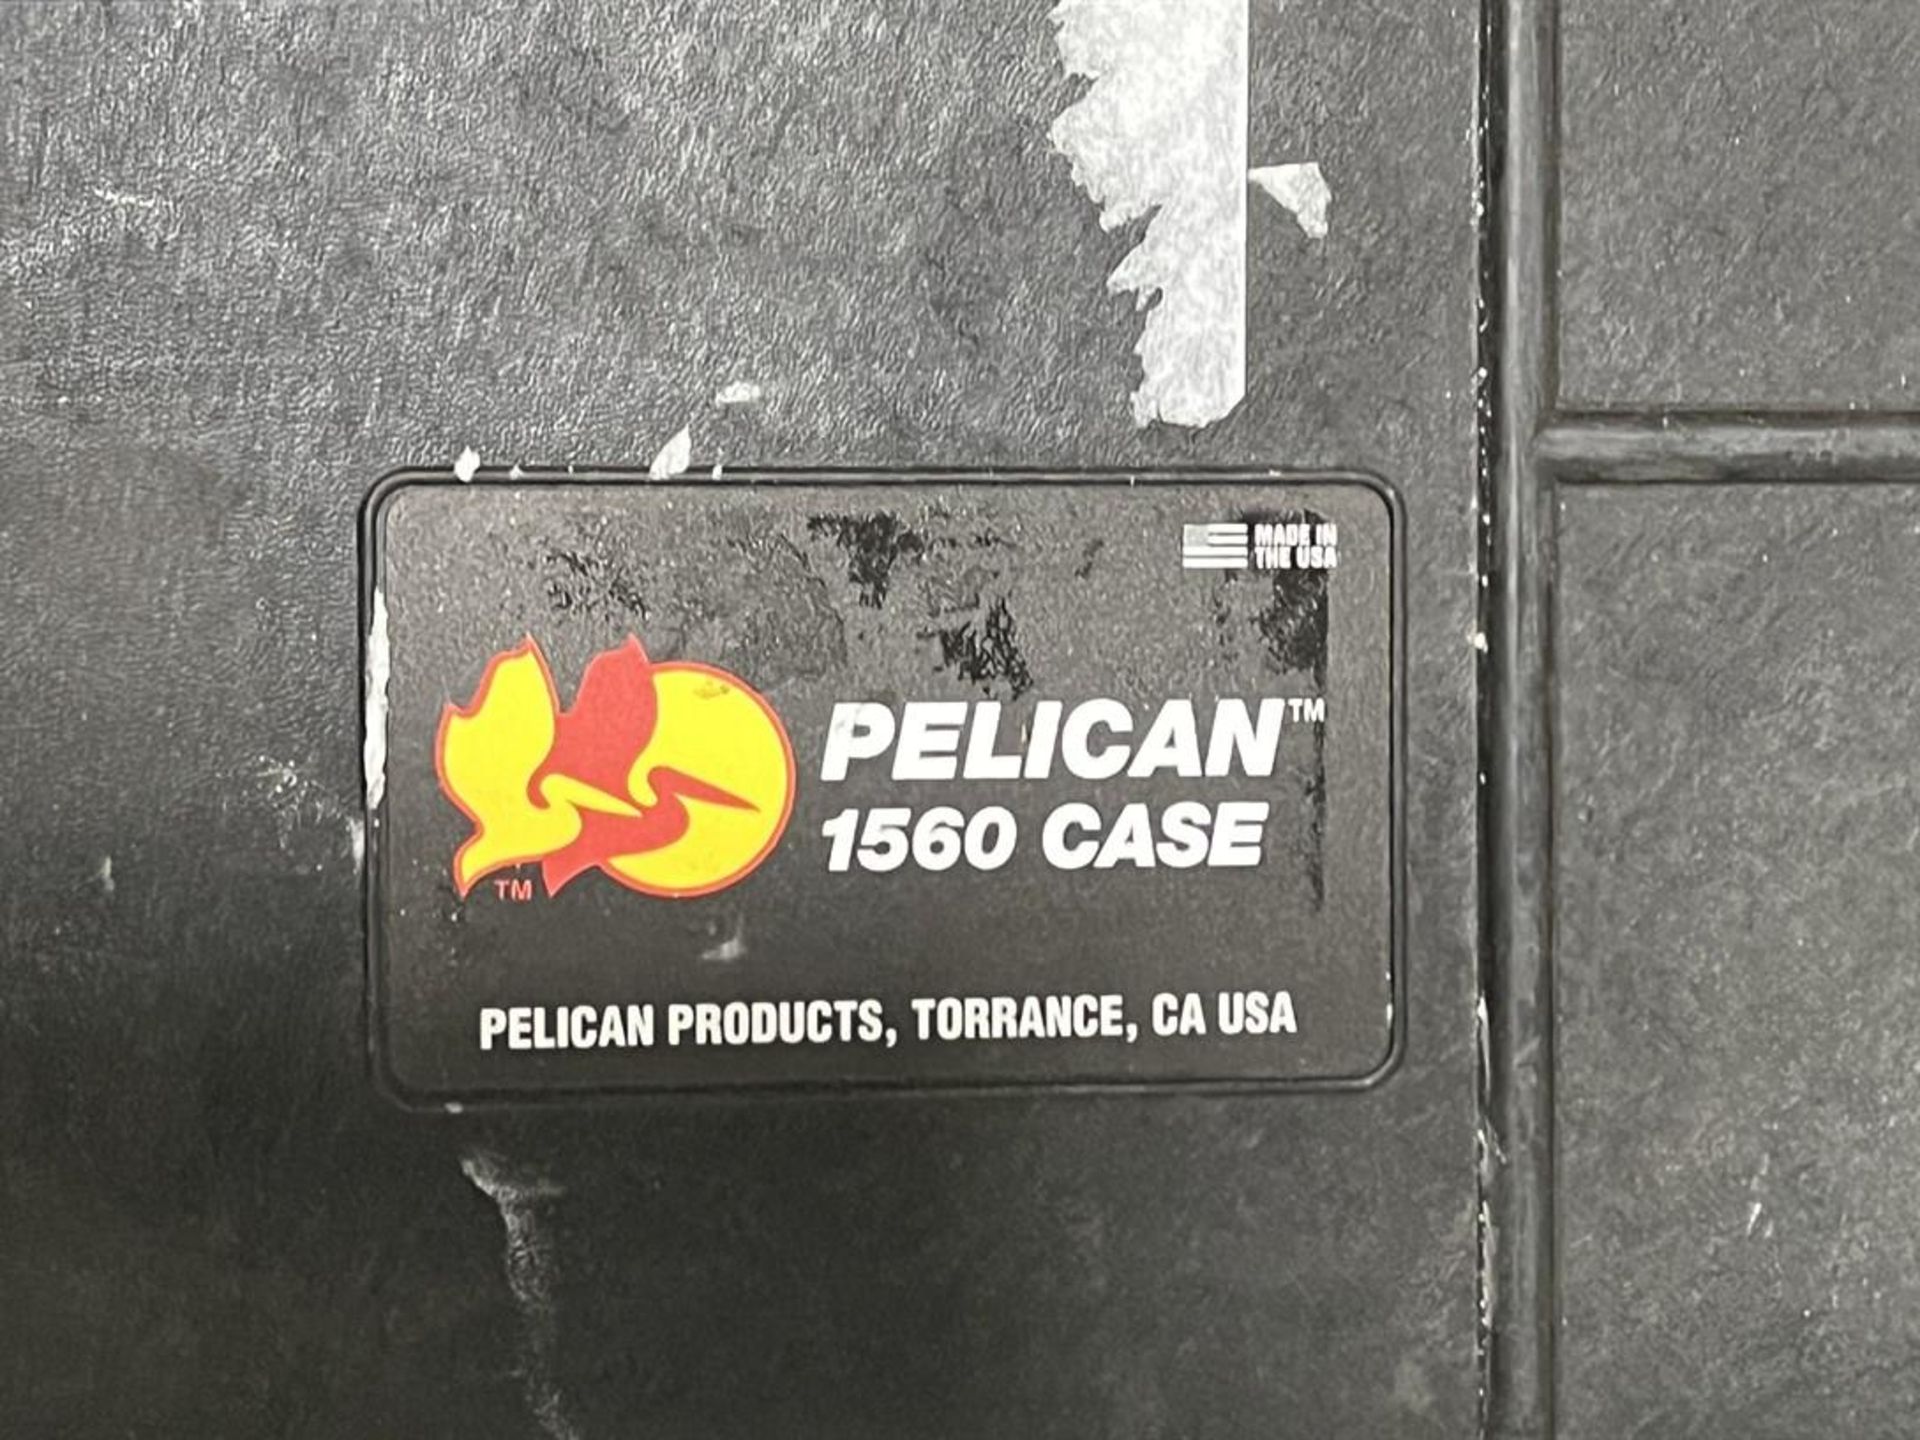 PELICAN 1560 Protective Transport Case - Image 2 of 3